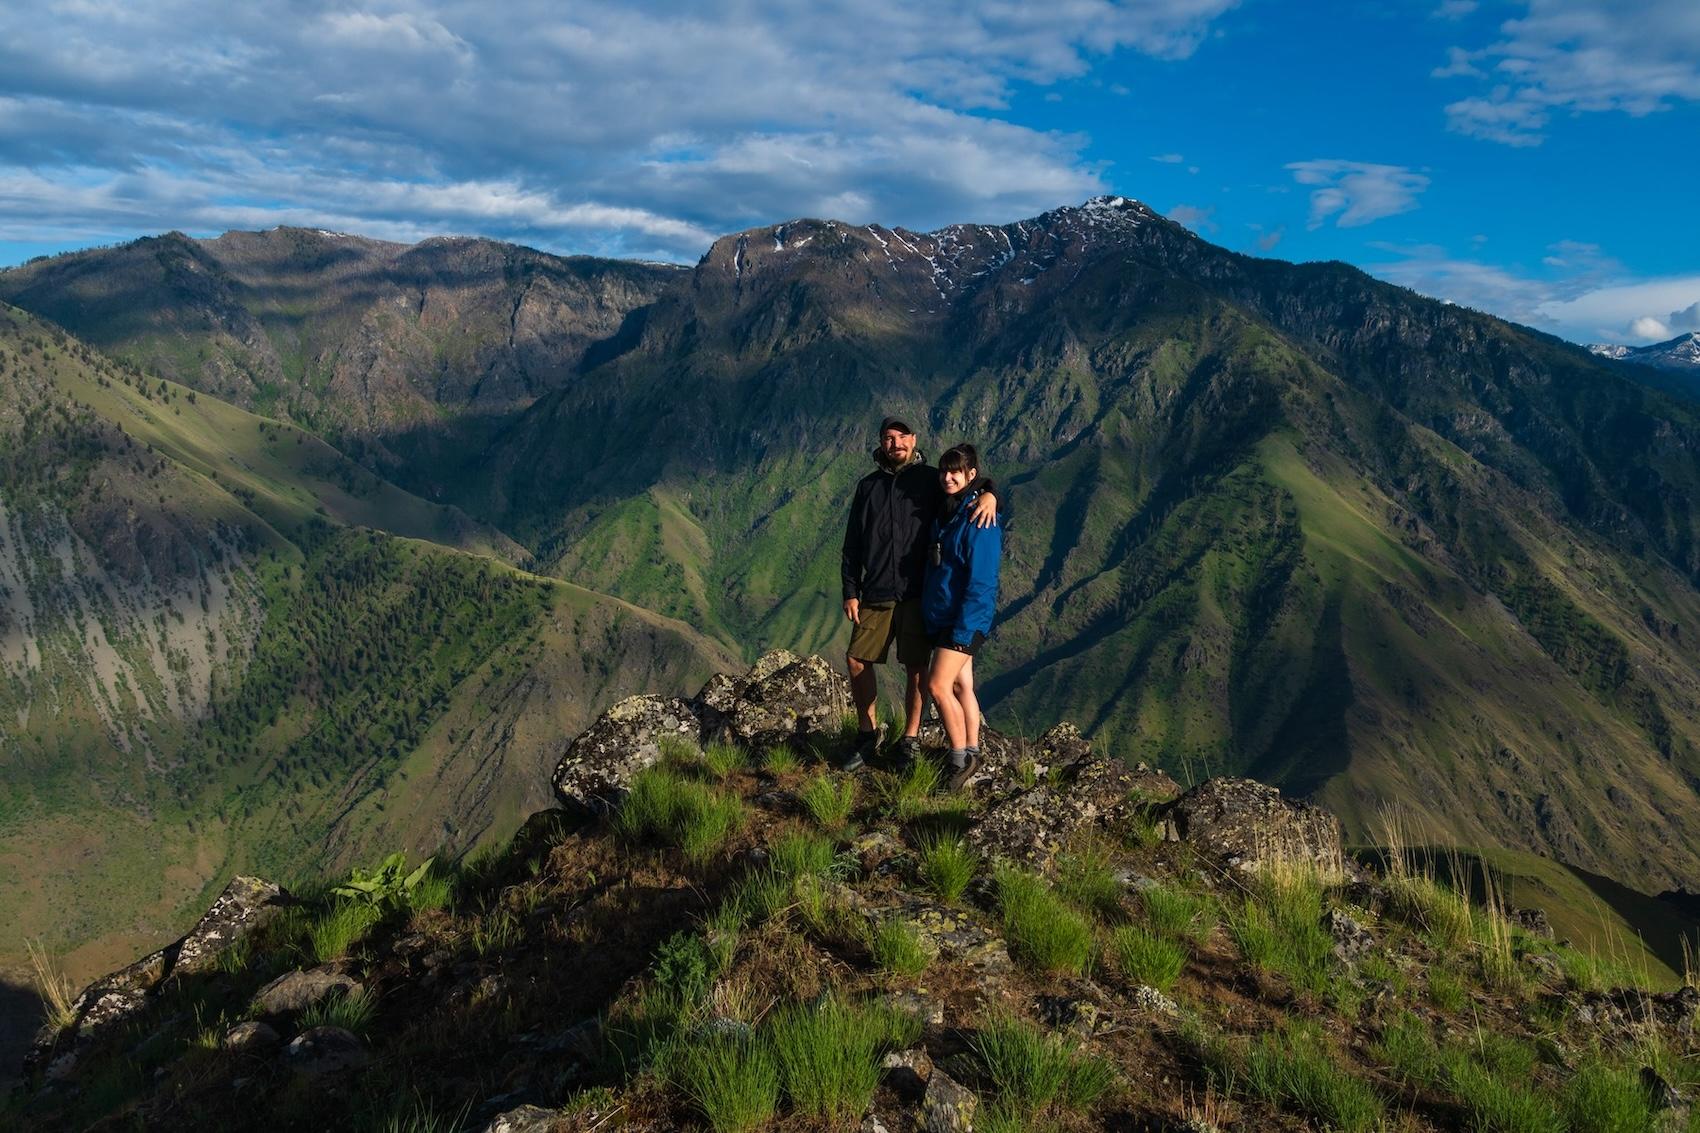 Brock Dallman and Sam Stych at a scenic viewpoint in Hells Canyon